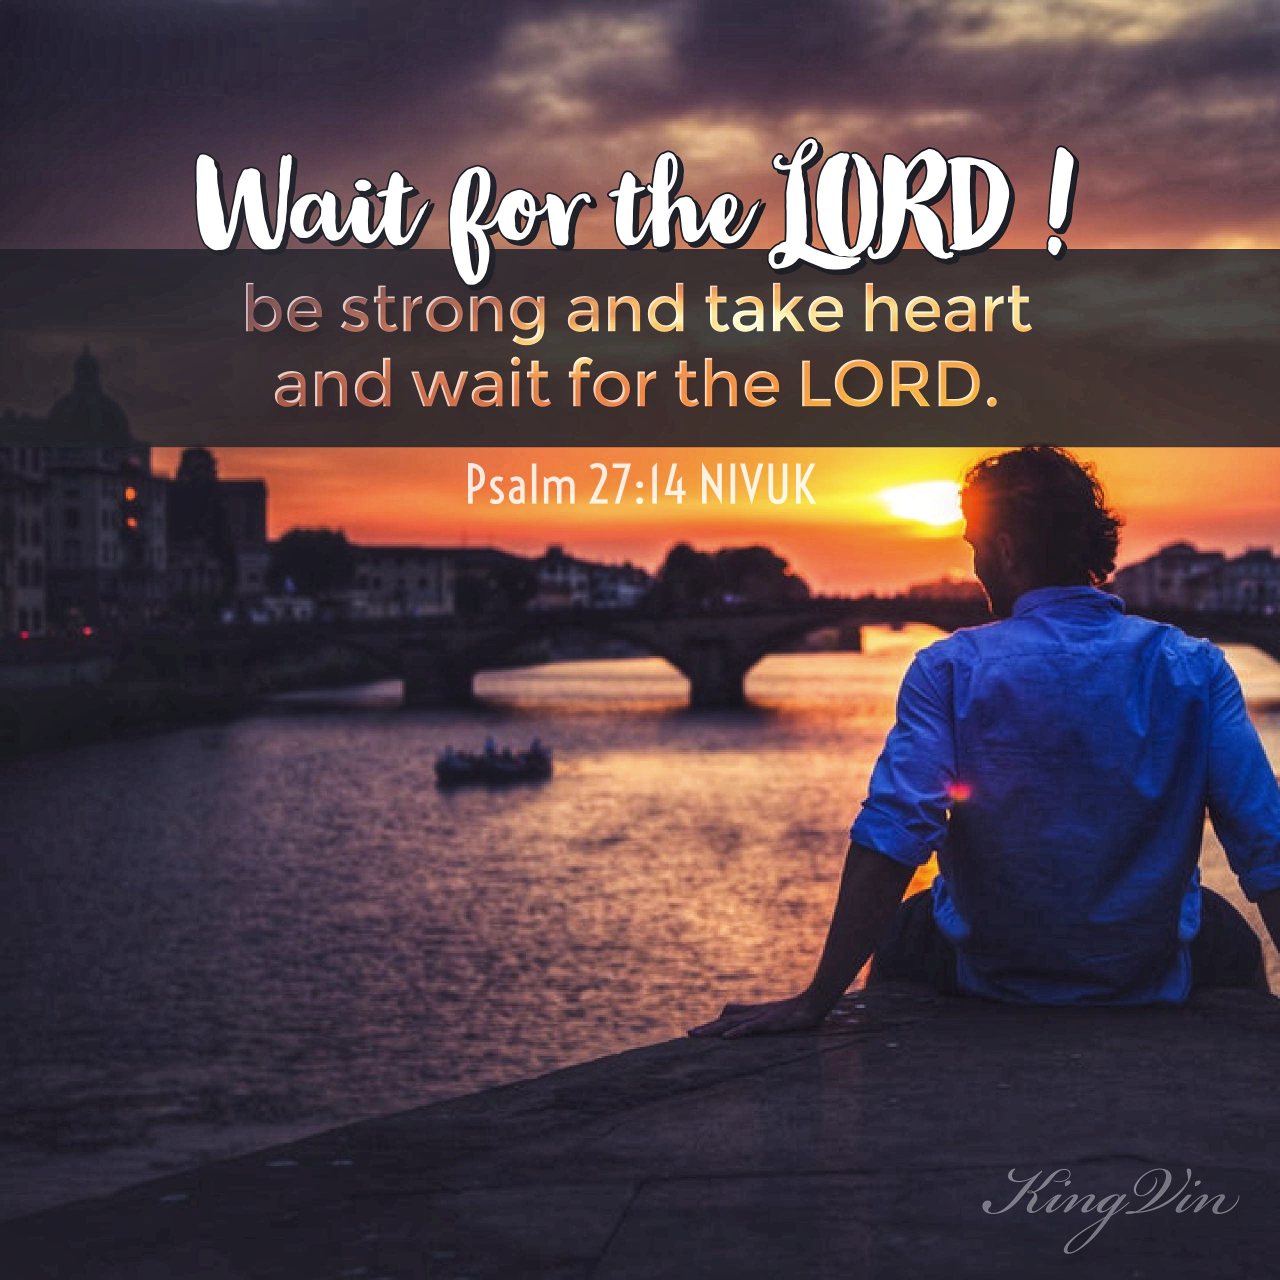 Wait for the Lord ; be strong and take heart and wait for the Lord . Psalm 27:14 NIVUK